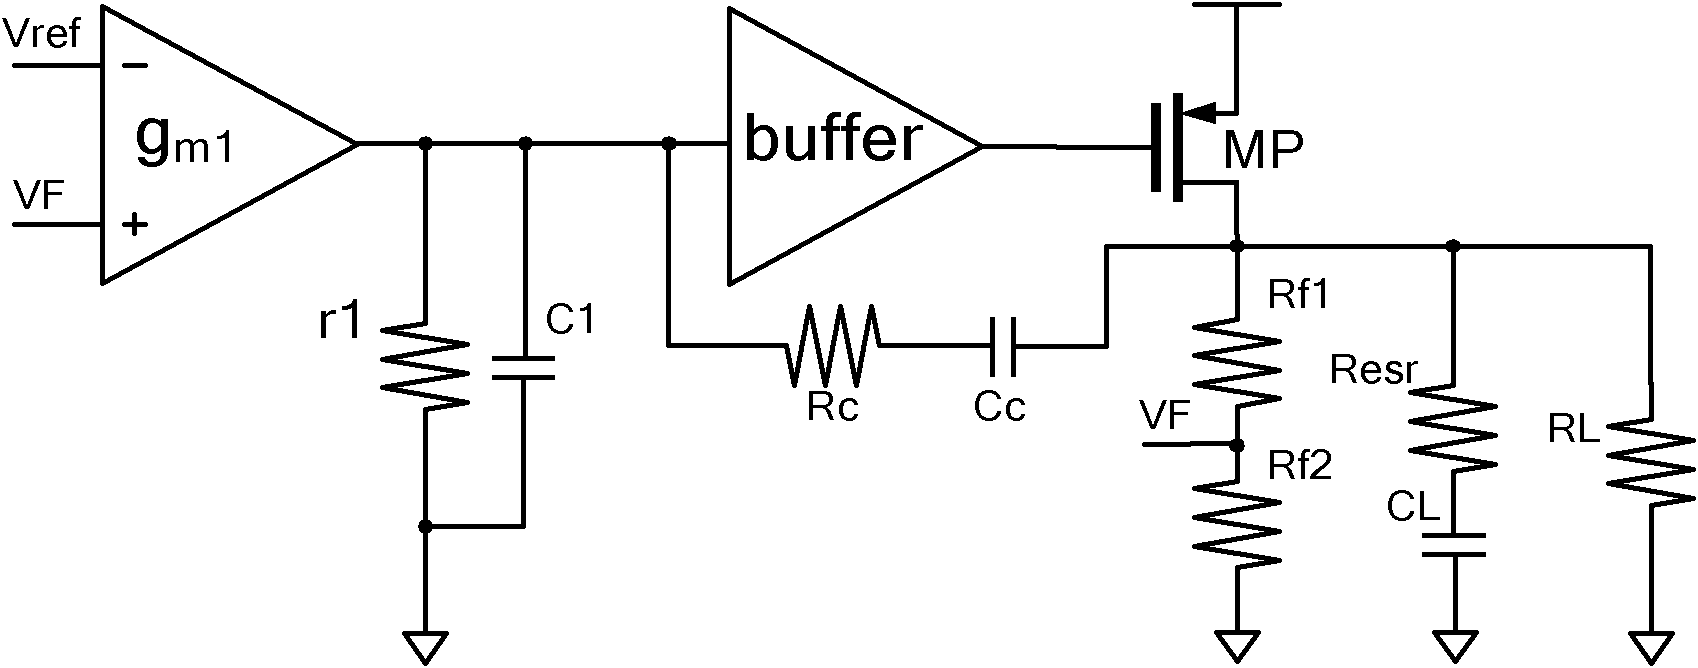 High-slew-rate error amplifier-based high-accuracy and high-speed low dropout (LDO) regulator circuit